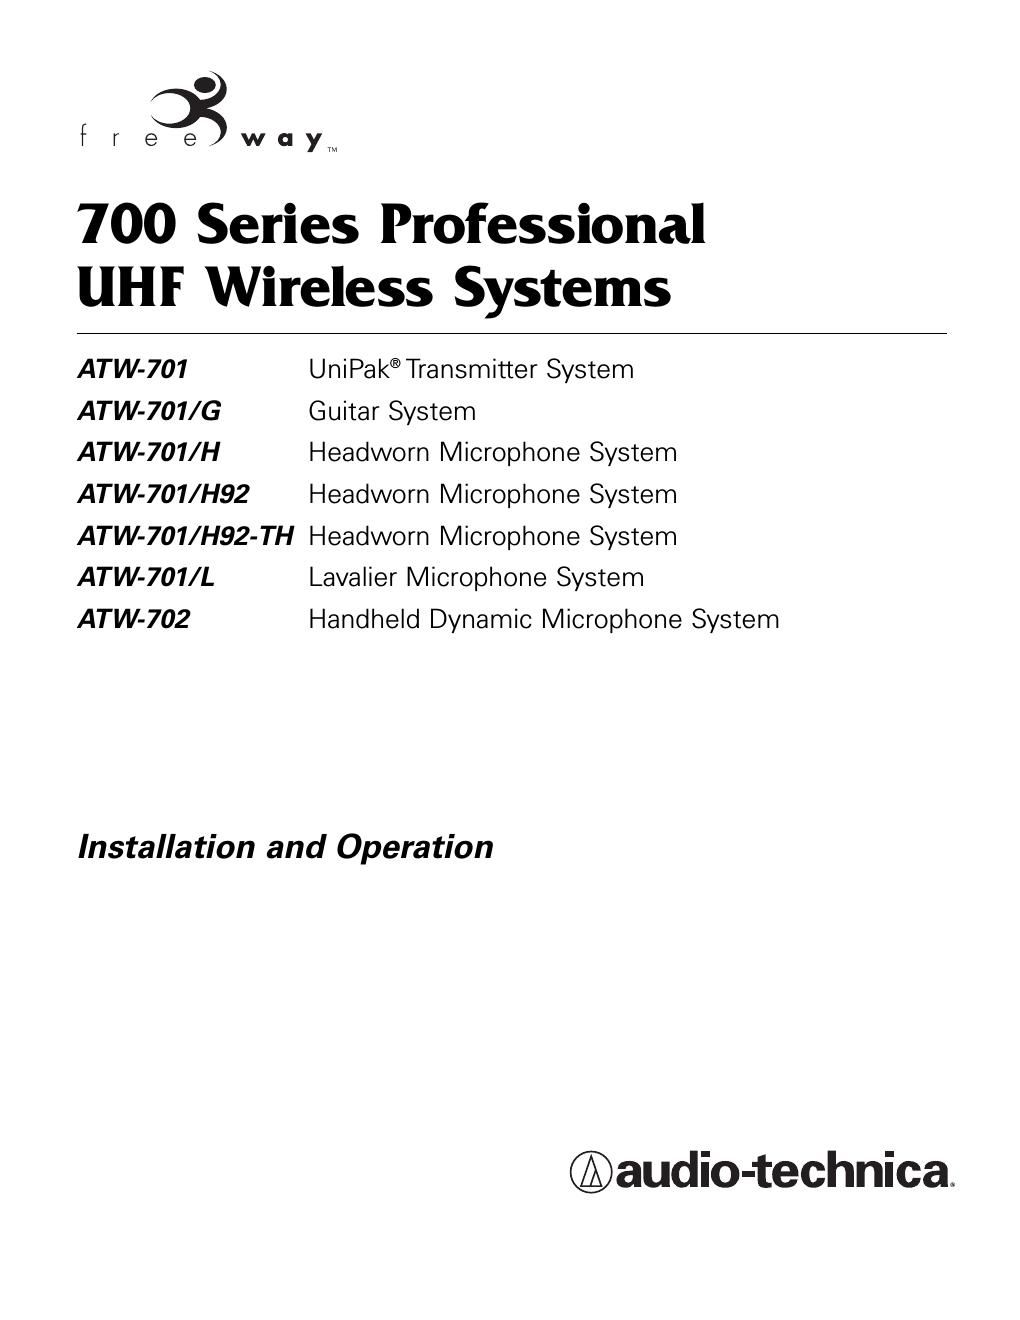 audio technica atw 701 l owners manual